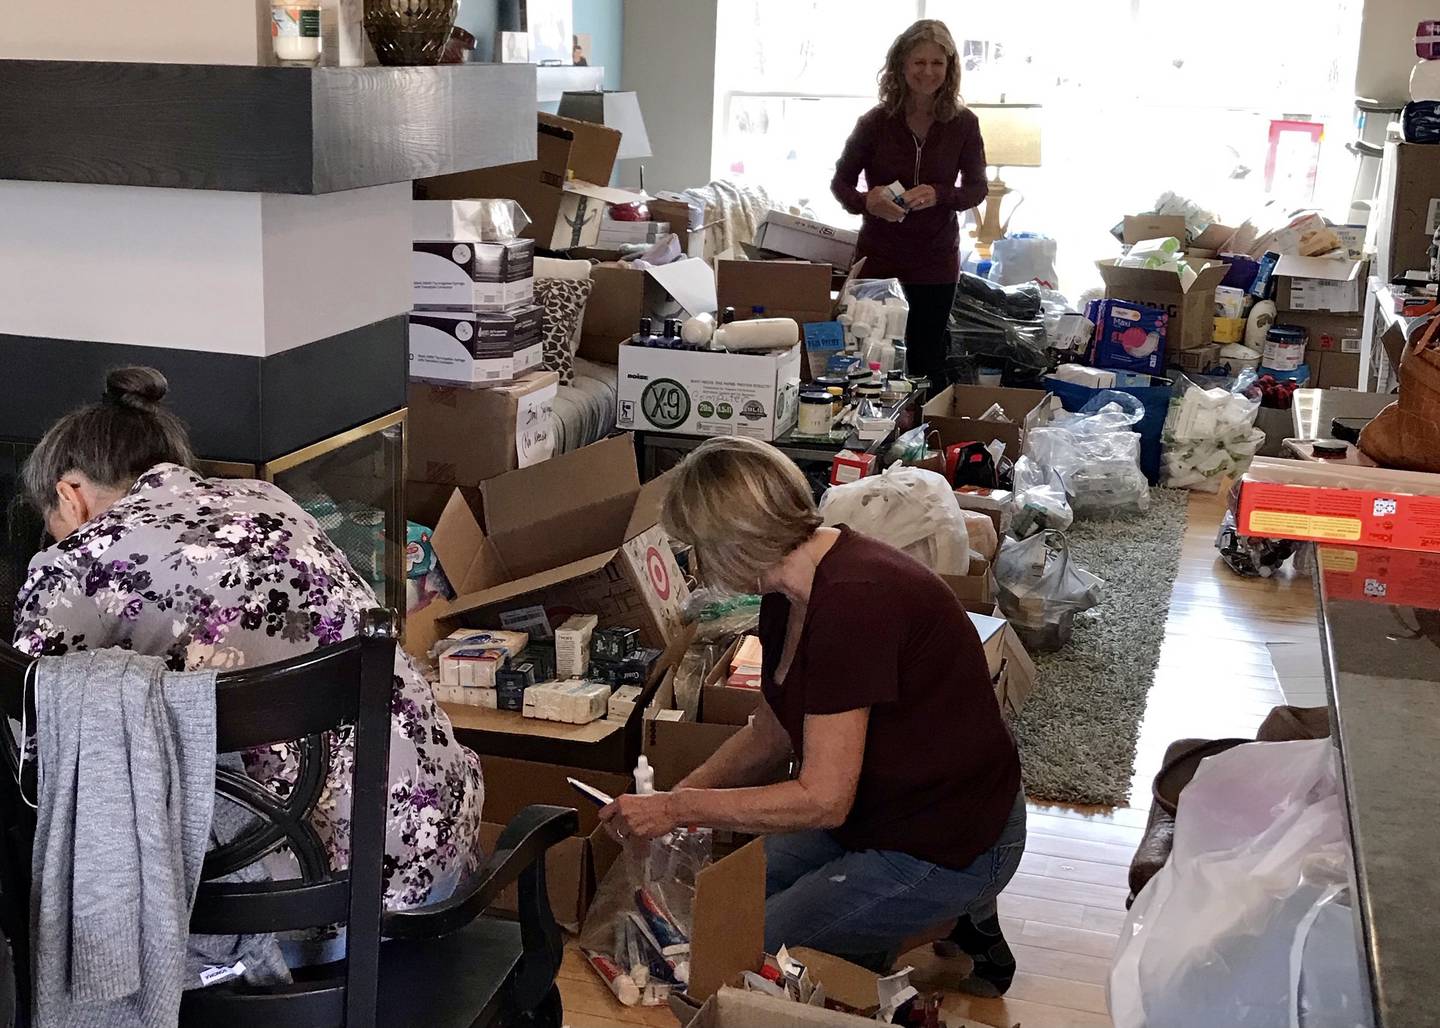 Community volunteers Tonya Traverso (left) of Oswego, Roxanne Mairs-Hawrylewicz (center front) and Vickie Drendel (back) of Naperville working in the home of Rene Koehler to sort and pack donations from the community for Ukrainian refugees.